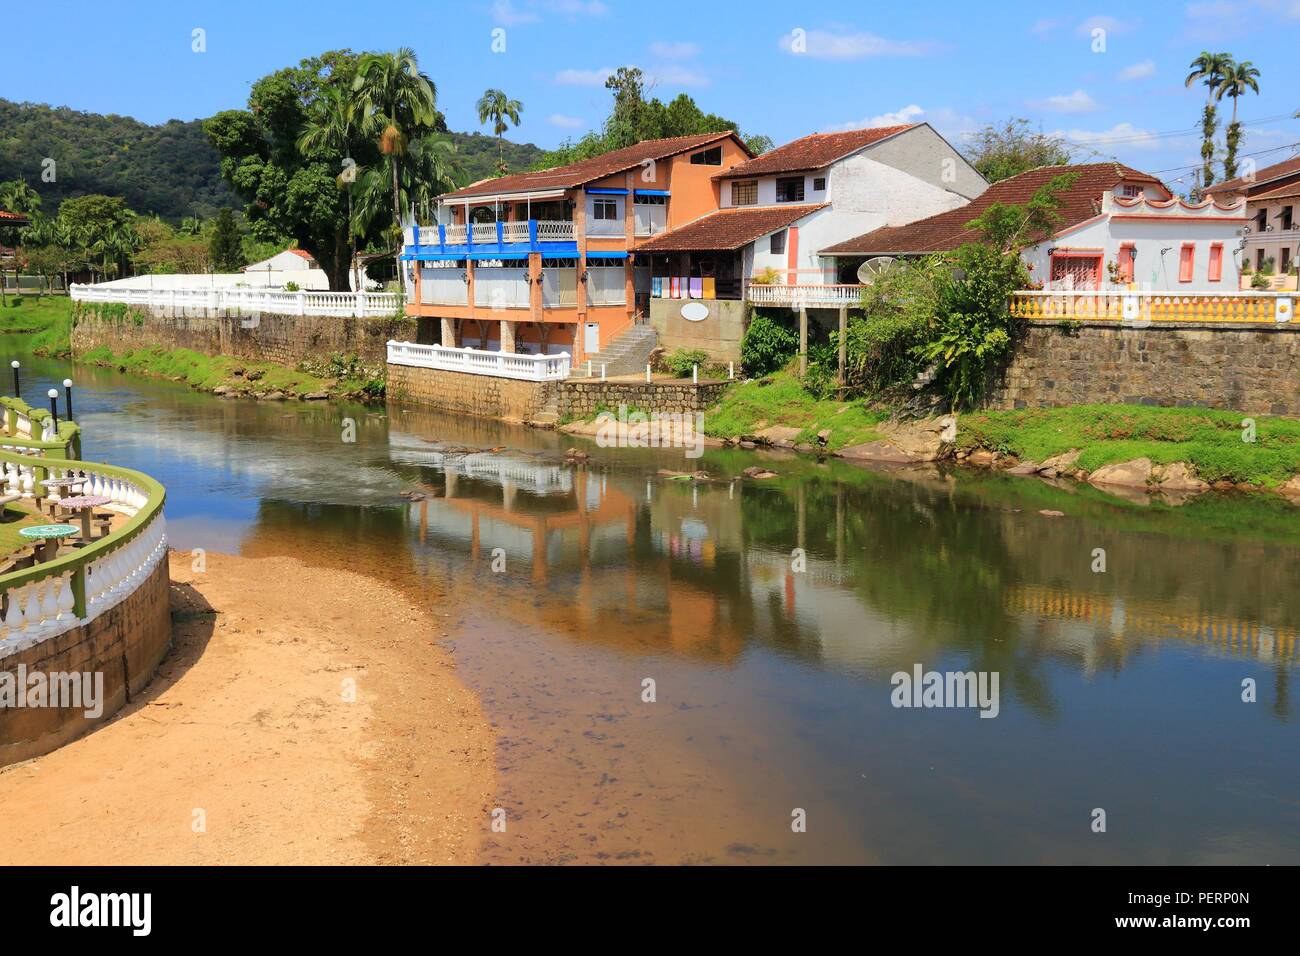 Brazil - colonial town of Morretes in the state of Parana. Old townscape with river reflection. Stock Photo